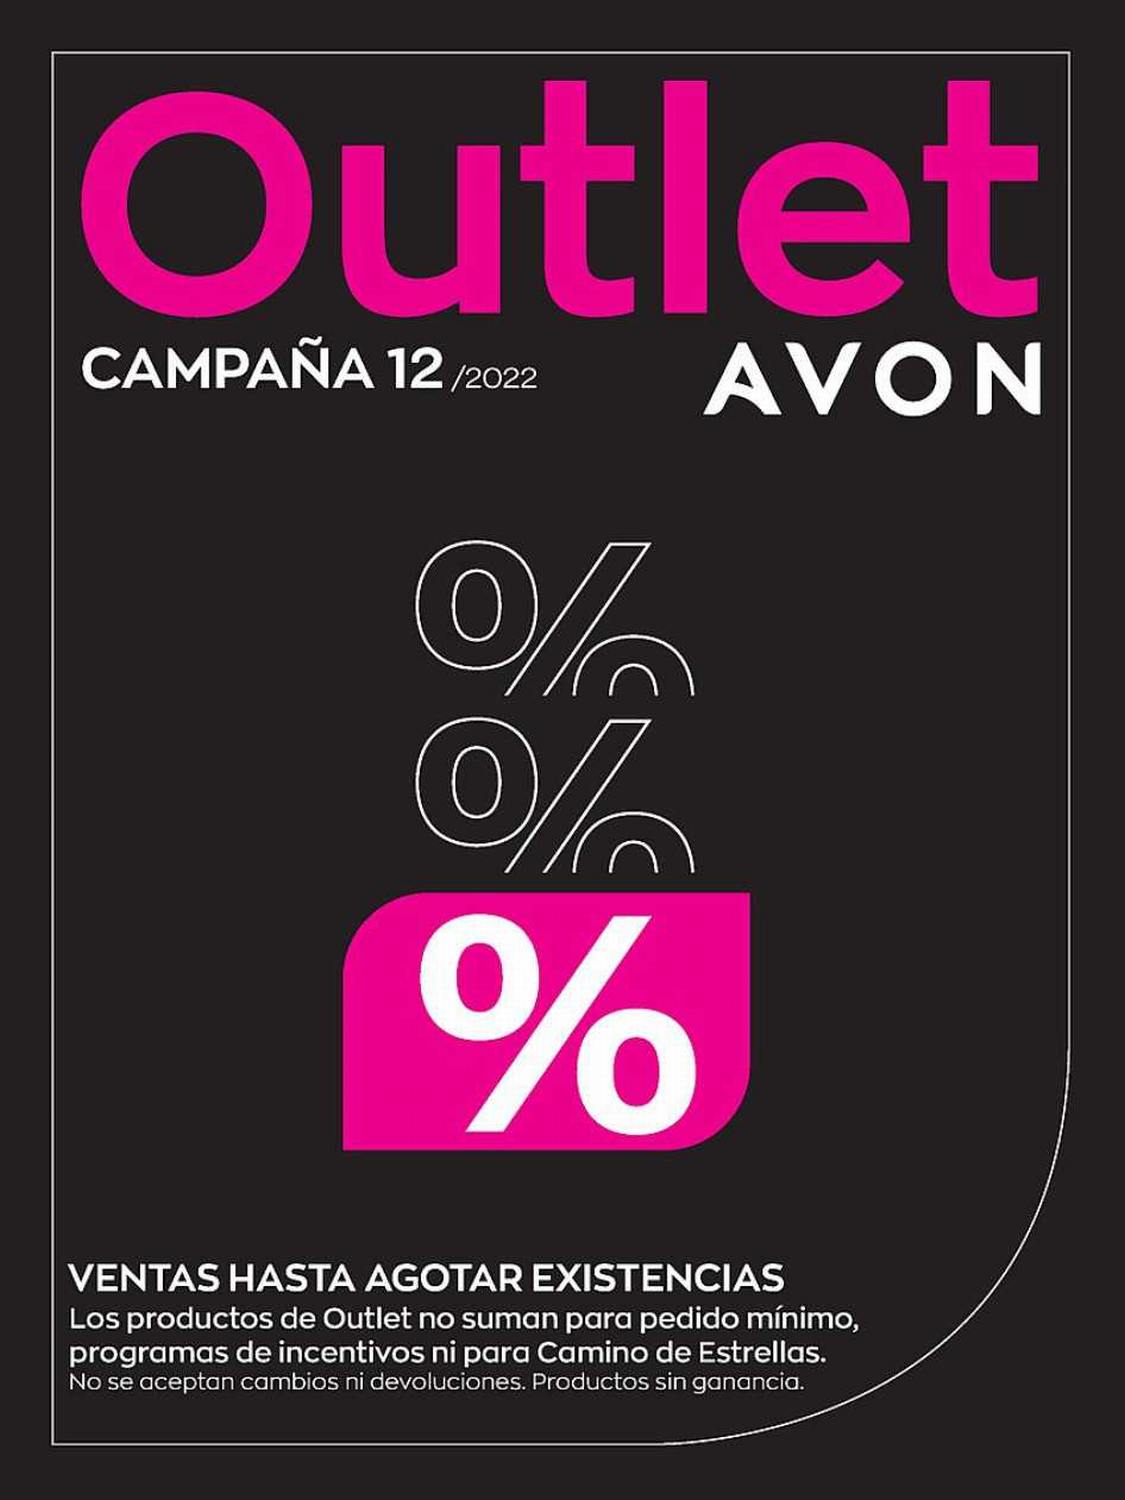 Avon Outlet Campaña 12 2022 Colombia